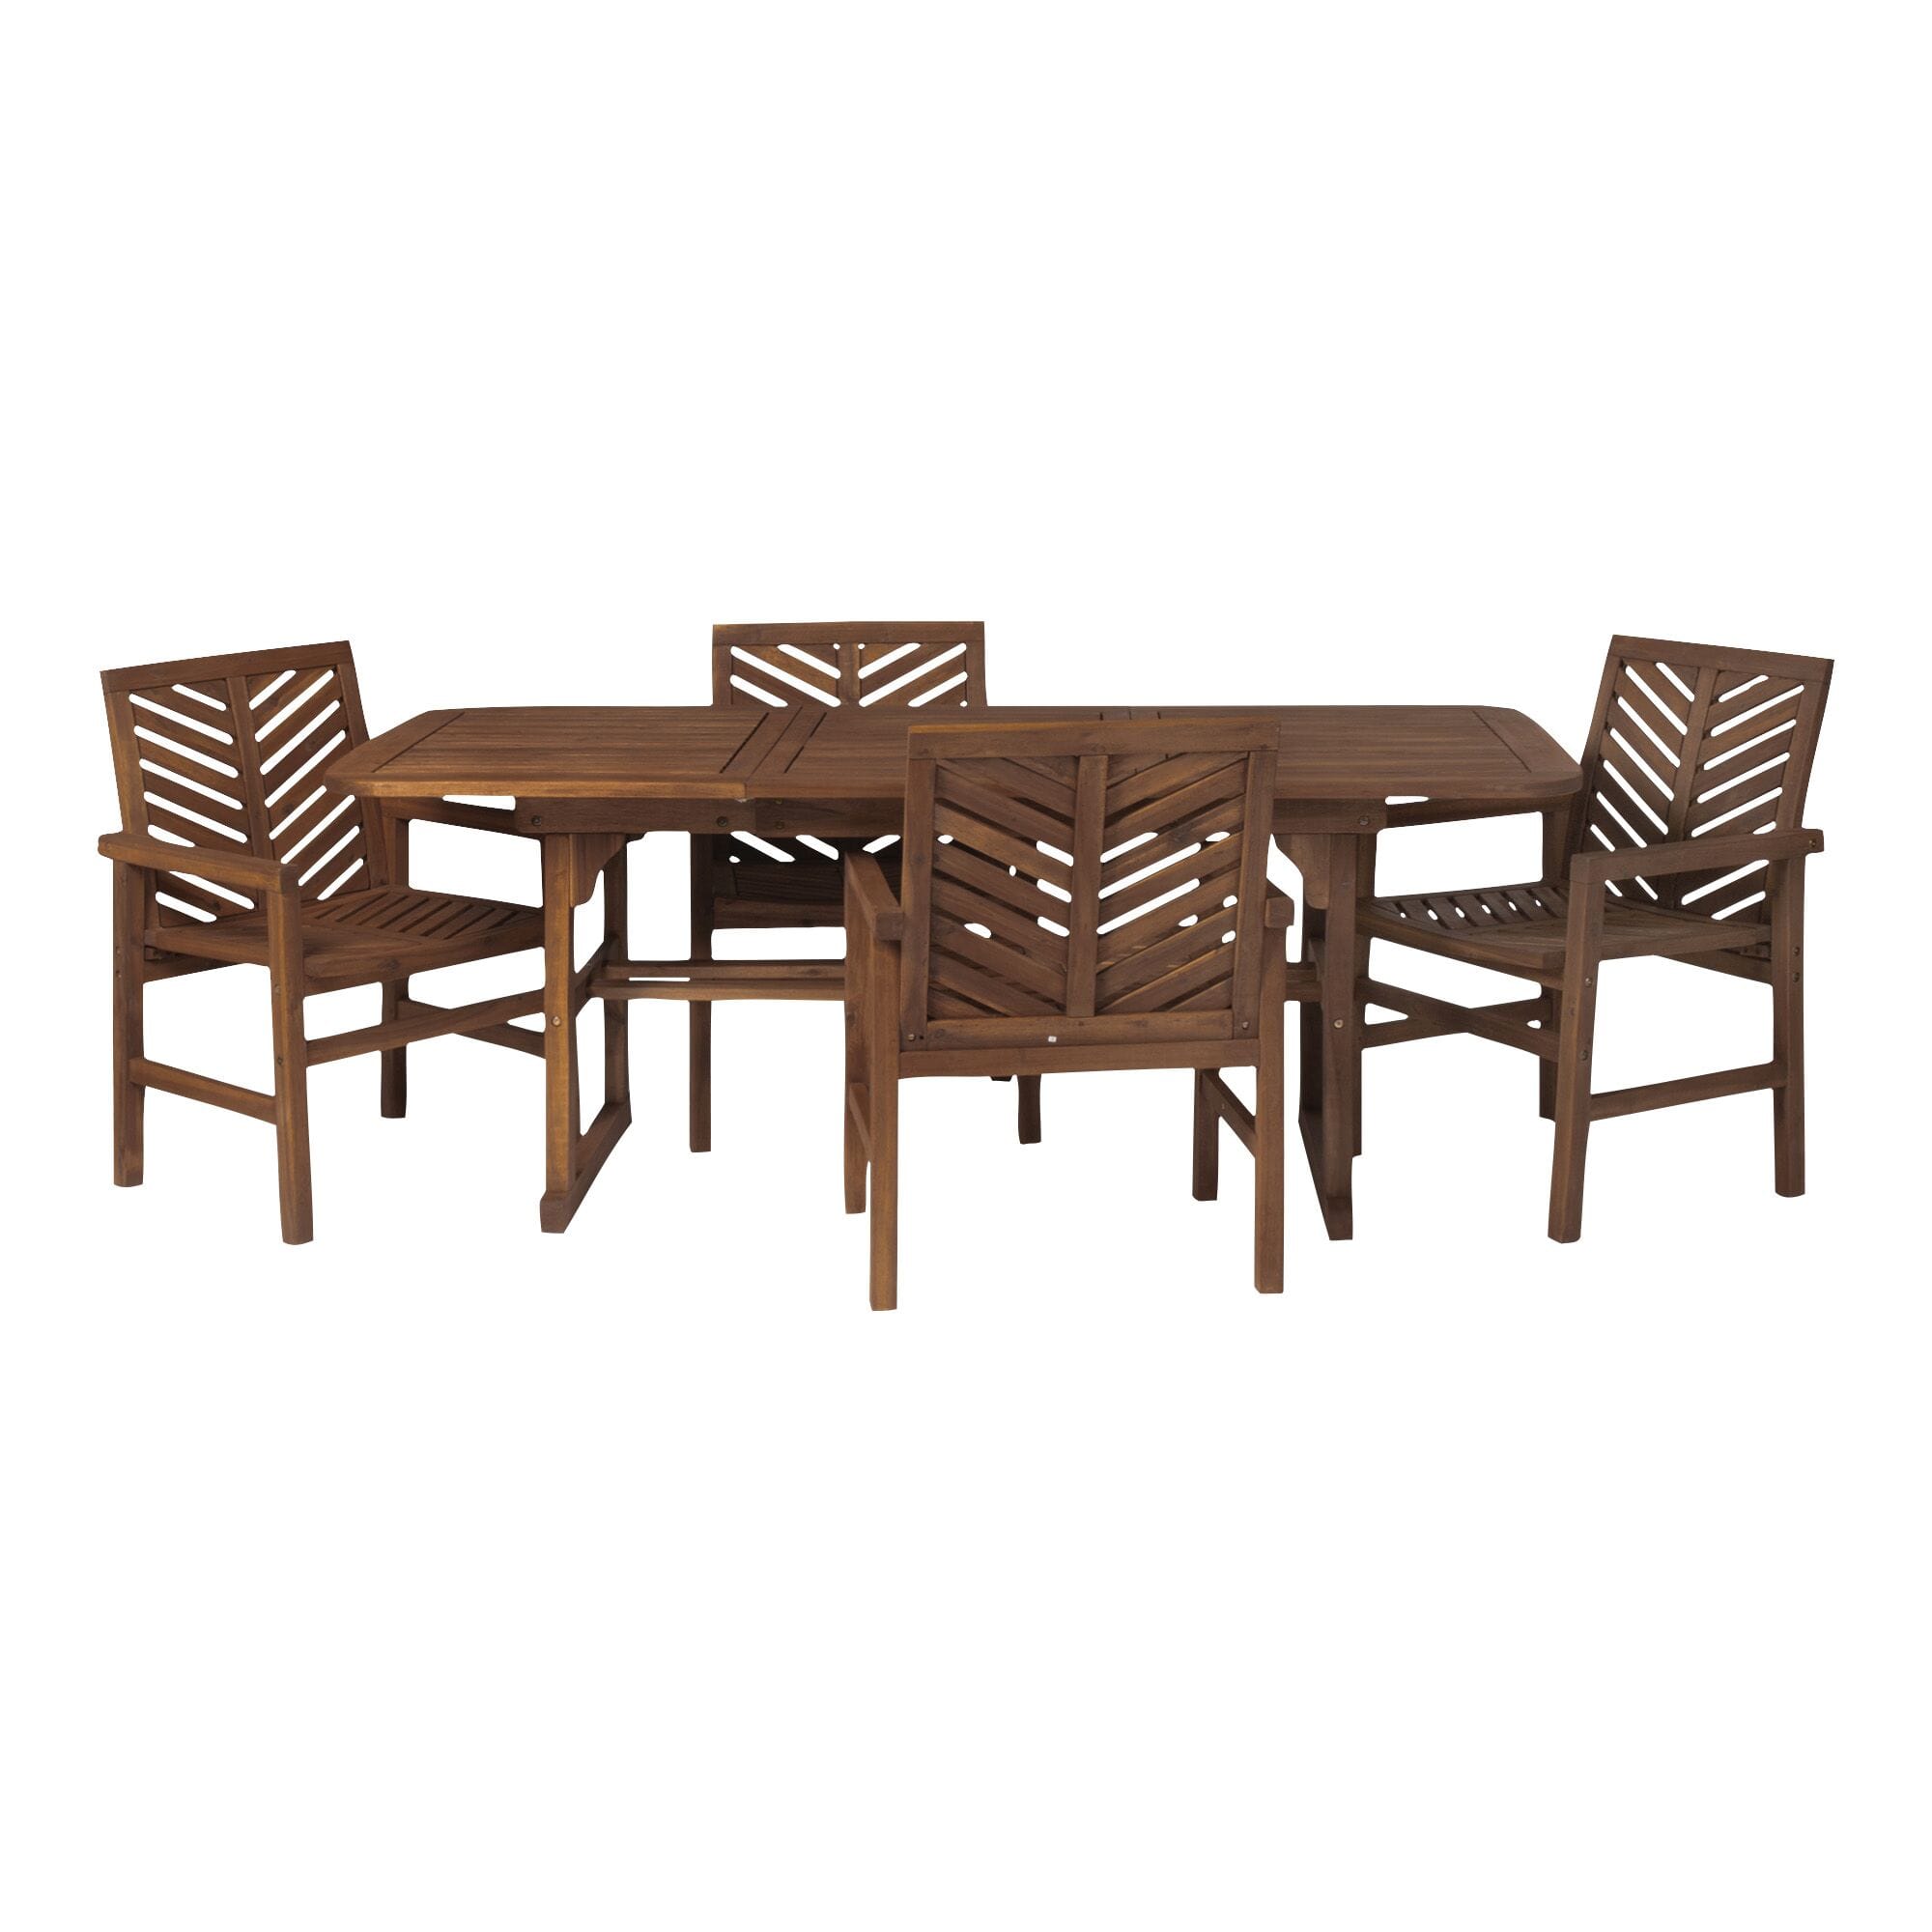 5-Piece Extendable Outdoor Patio Dining Set - Dark Brown by Walker Edison